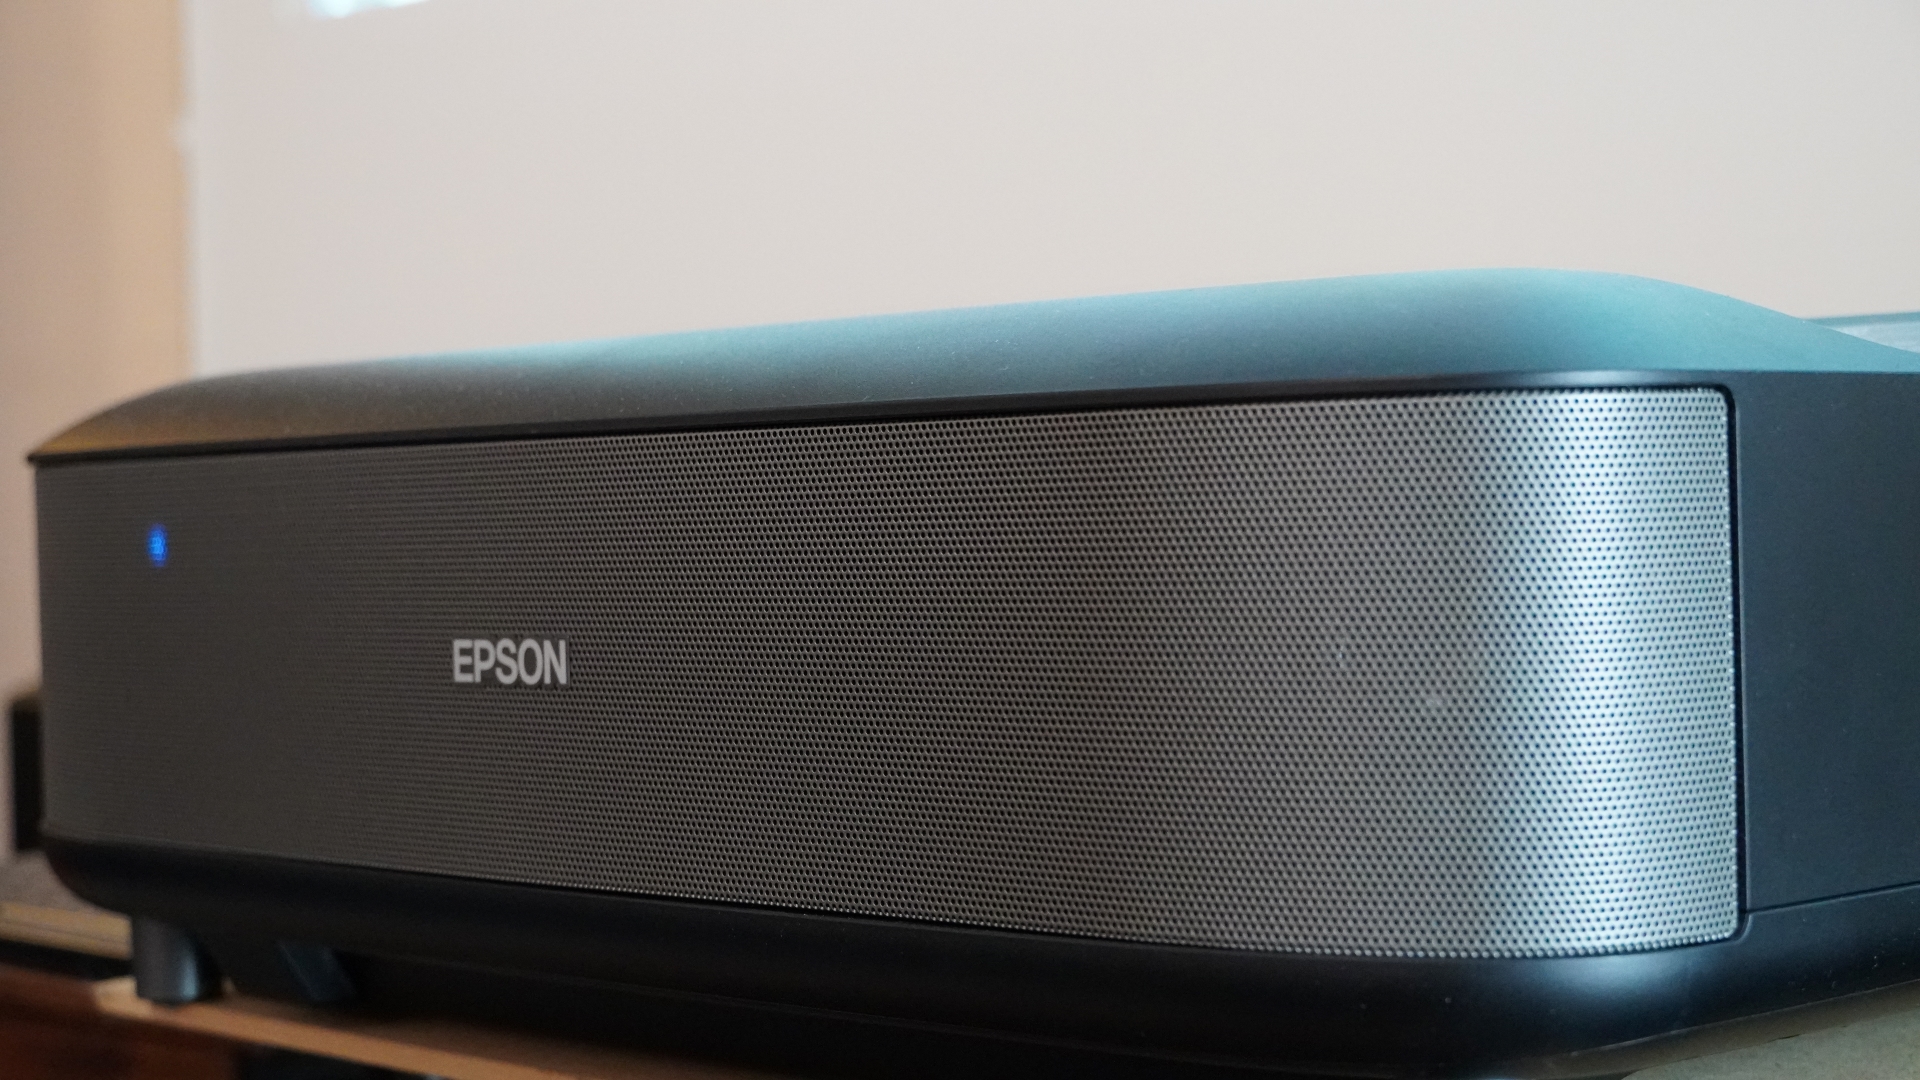 Epson LS650 cllose up showing built-in speakers